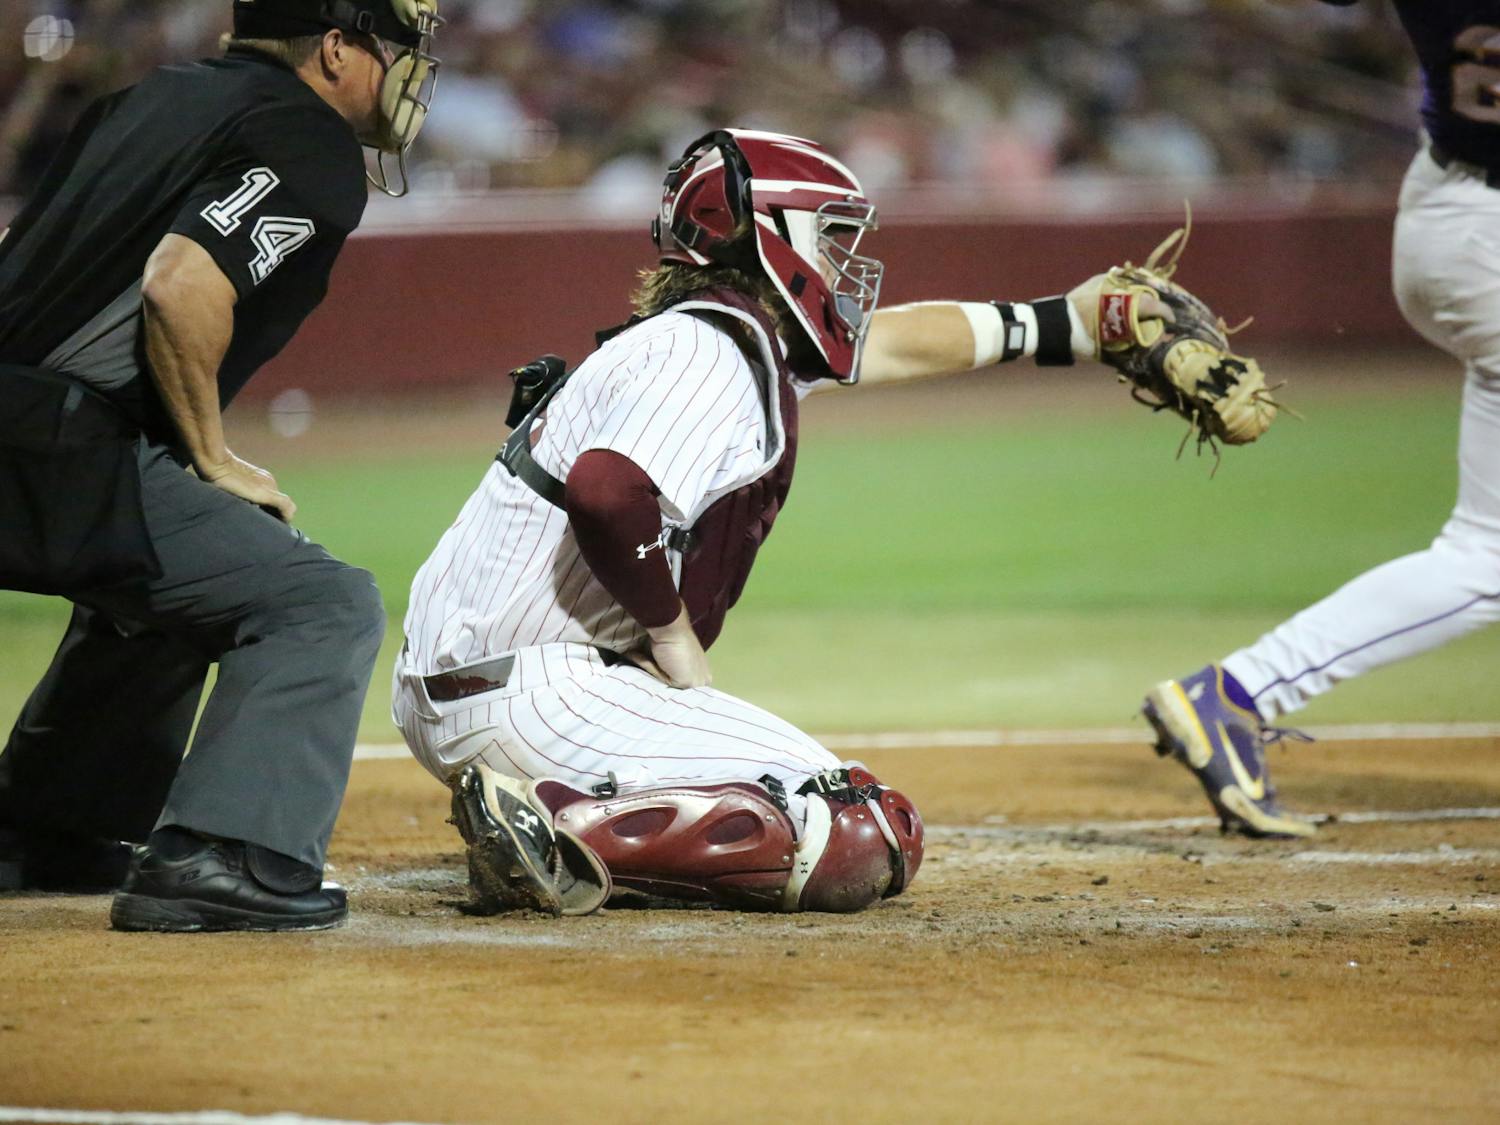 Sophomore catcher Cole Messina was the starting catcher for the Gamecocks on April 6, 2023, working with four pitchers and helping the team win 13-5 against the LSU Tigers. Due to a weather cancellation, the teams only played two games and split the series 1-1.